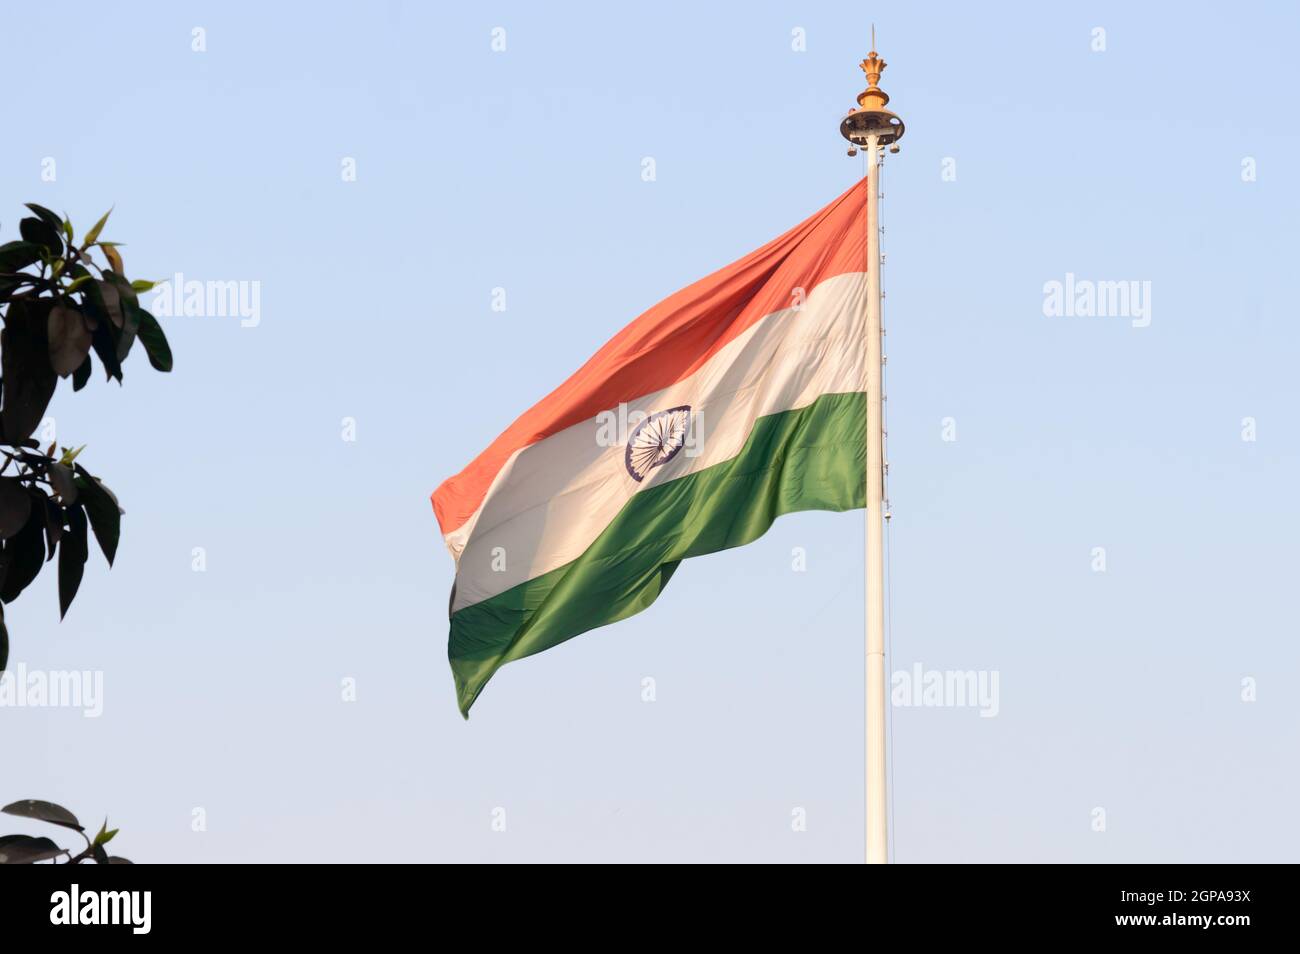 Indian flag flying against blue sky background. The National Flag of India is a horizontal rectangular tricolor (saffron, white and green color) with Stock Photo